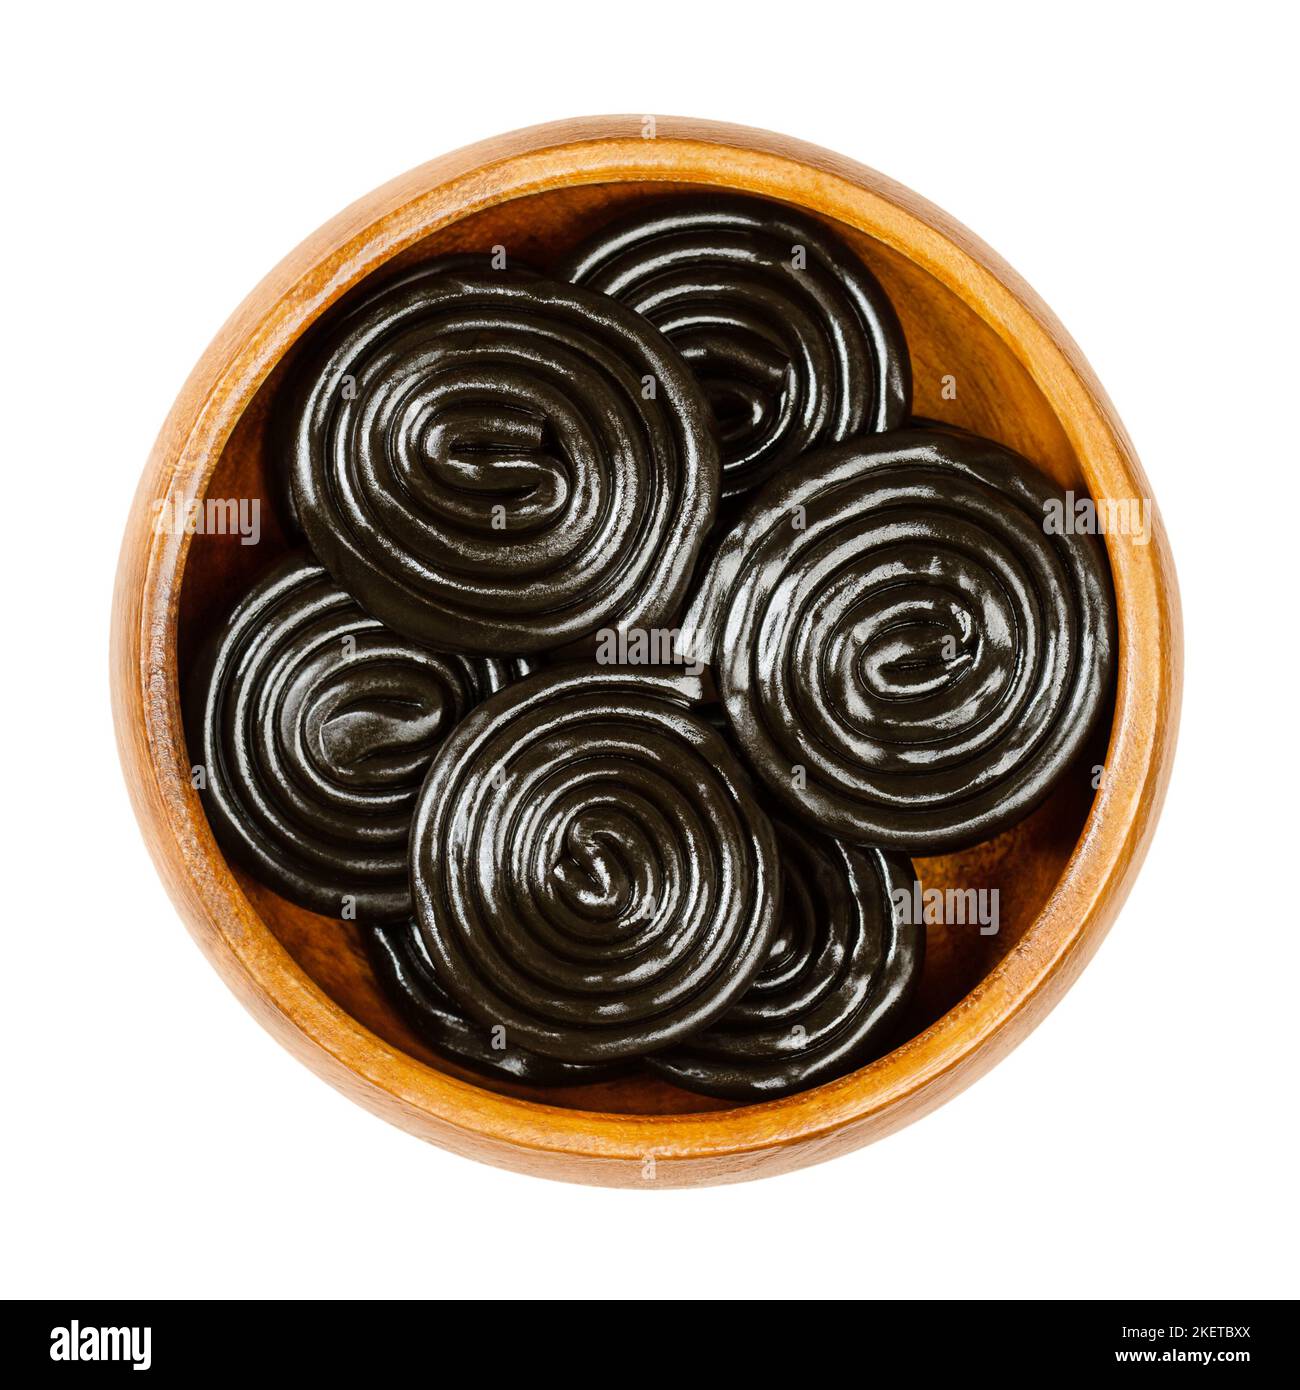 Liquorice wheels, in a wooden bowl. Licorice, is a confection, usually flavored and colored black with the extract of the roots of the liquorice plant. Stock Photo